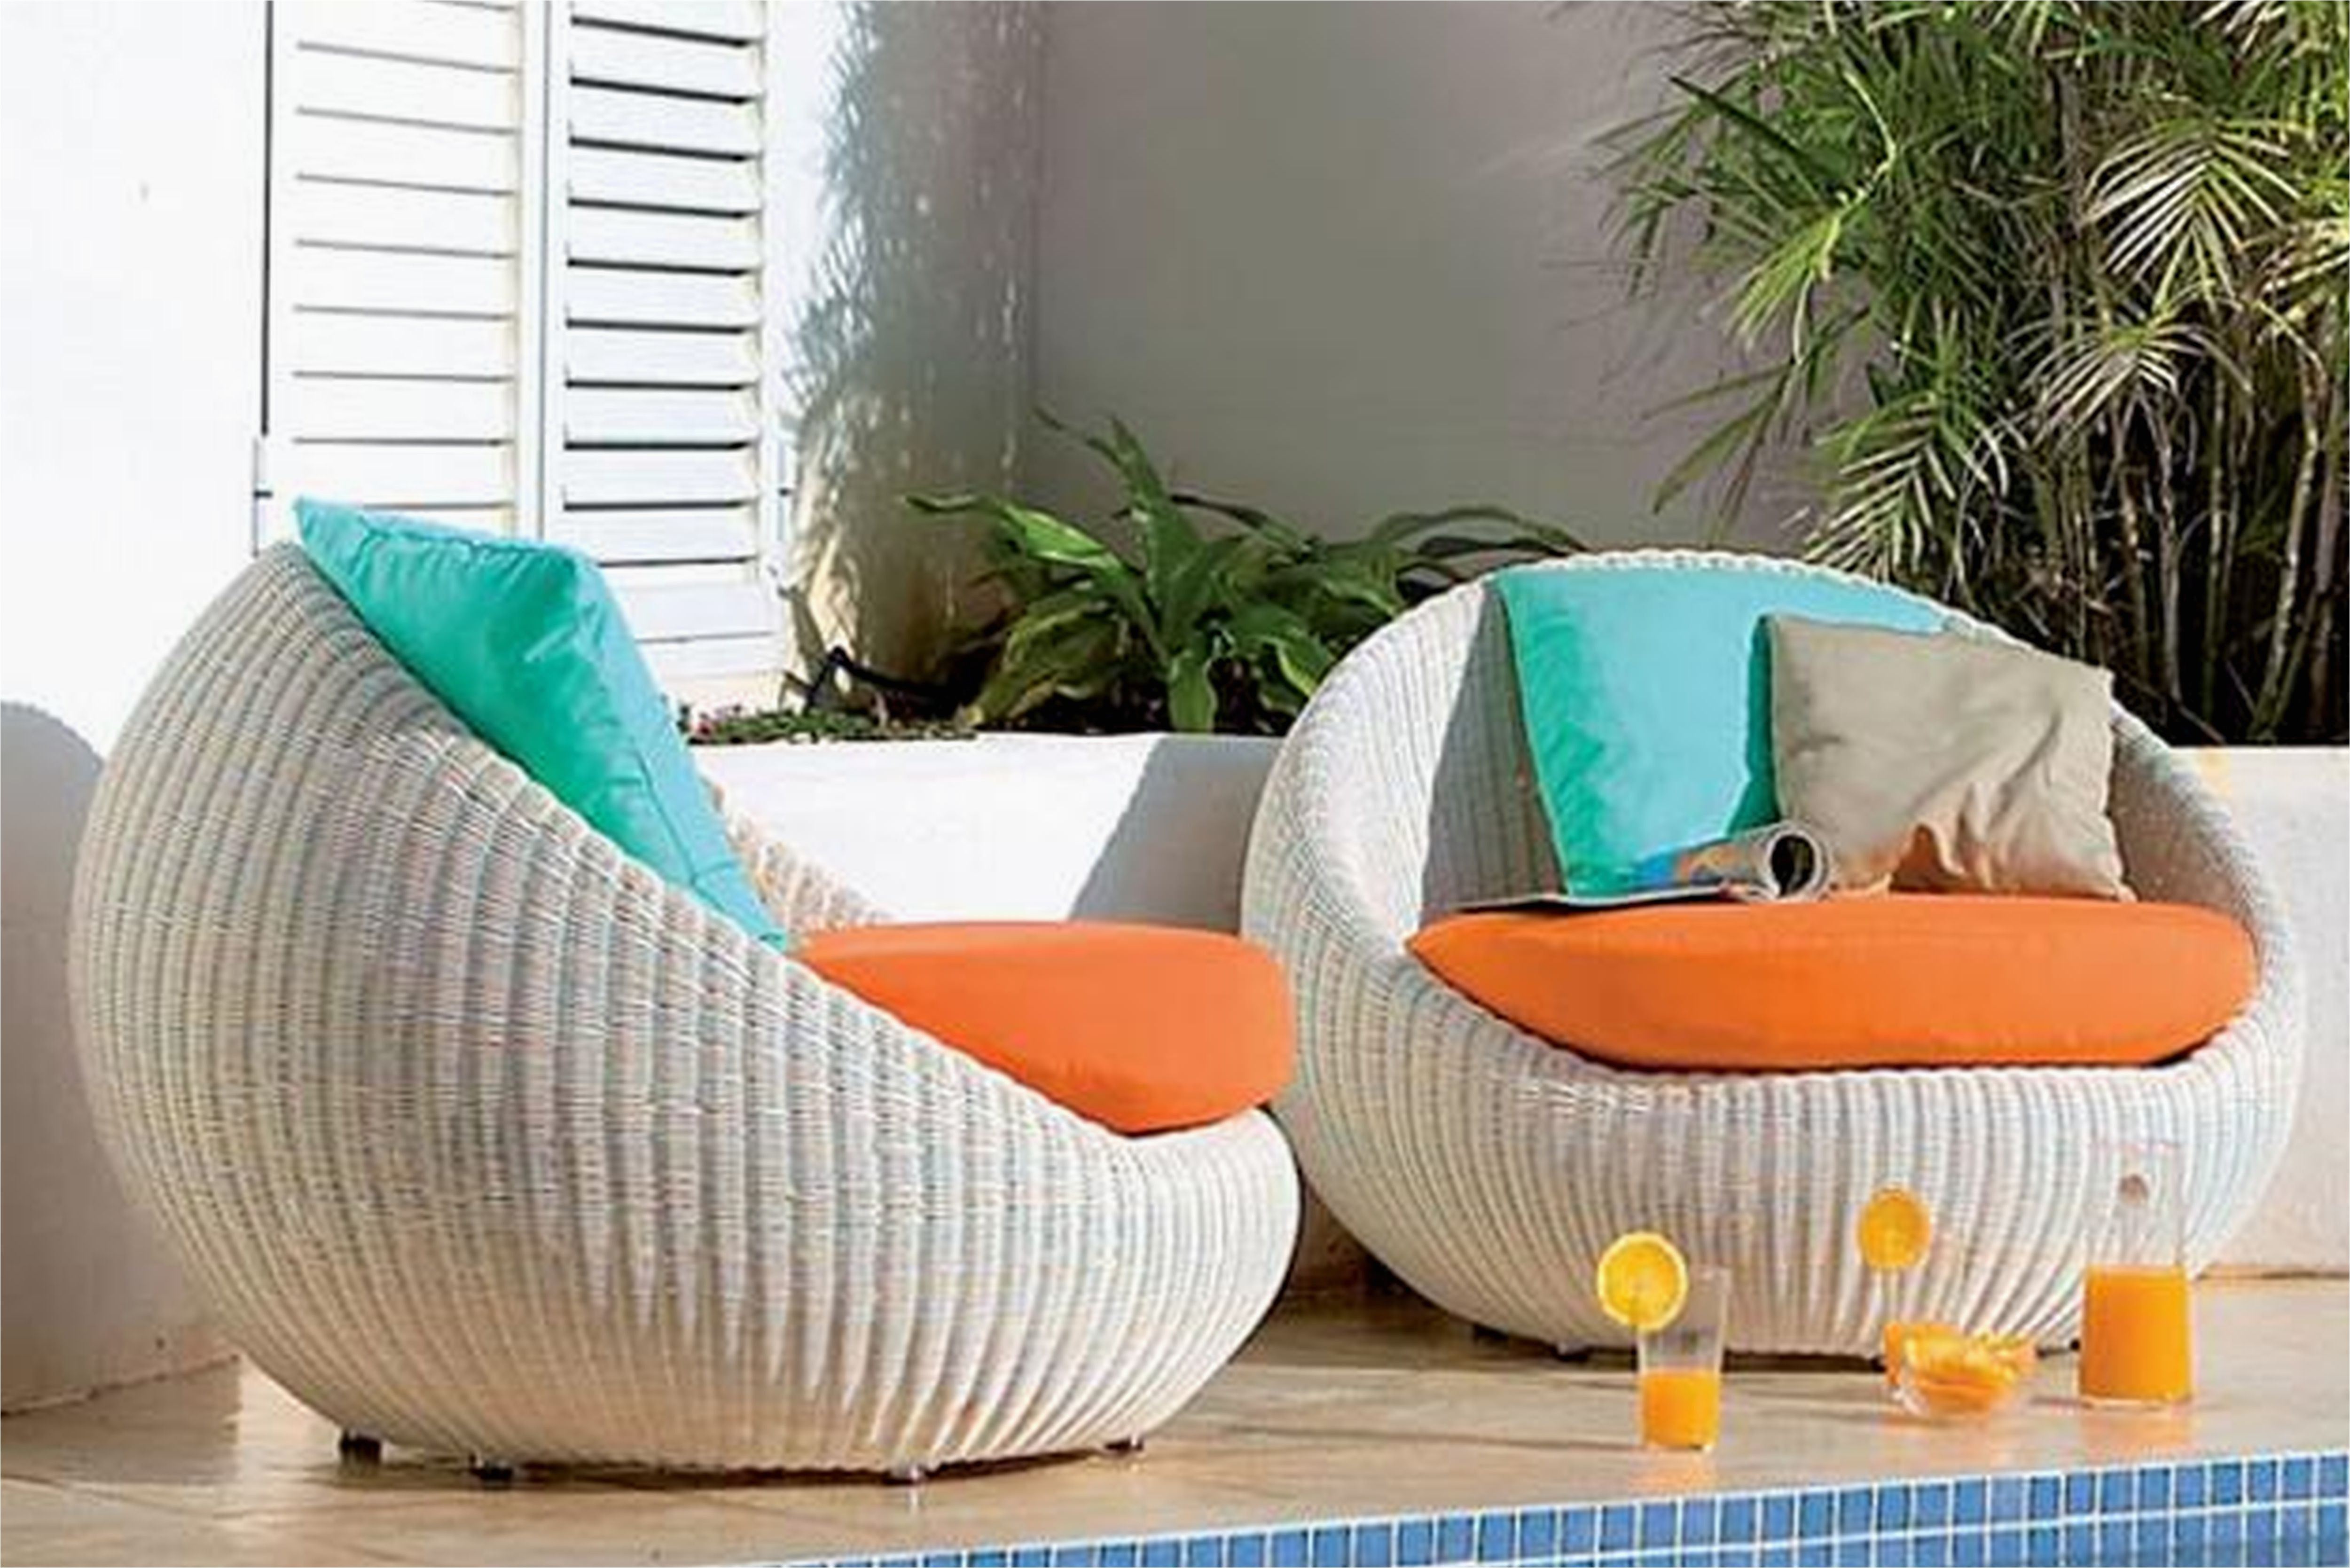 furniture for sale by owner unique marvelous wicker outdoor furniture sale 29 wooden patio sofa 0d